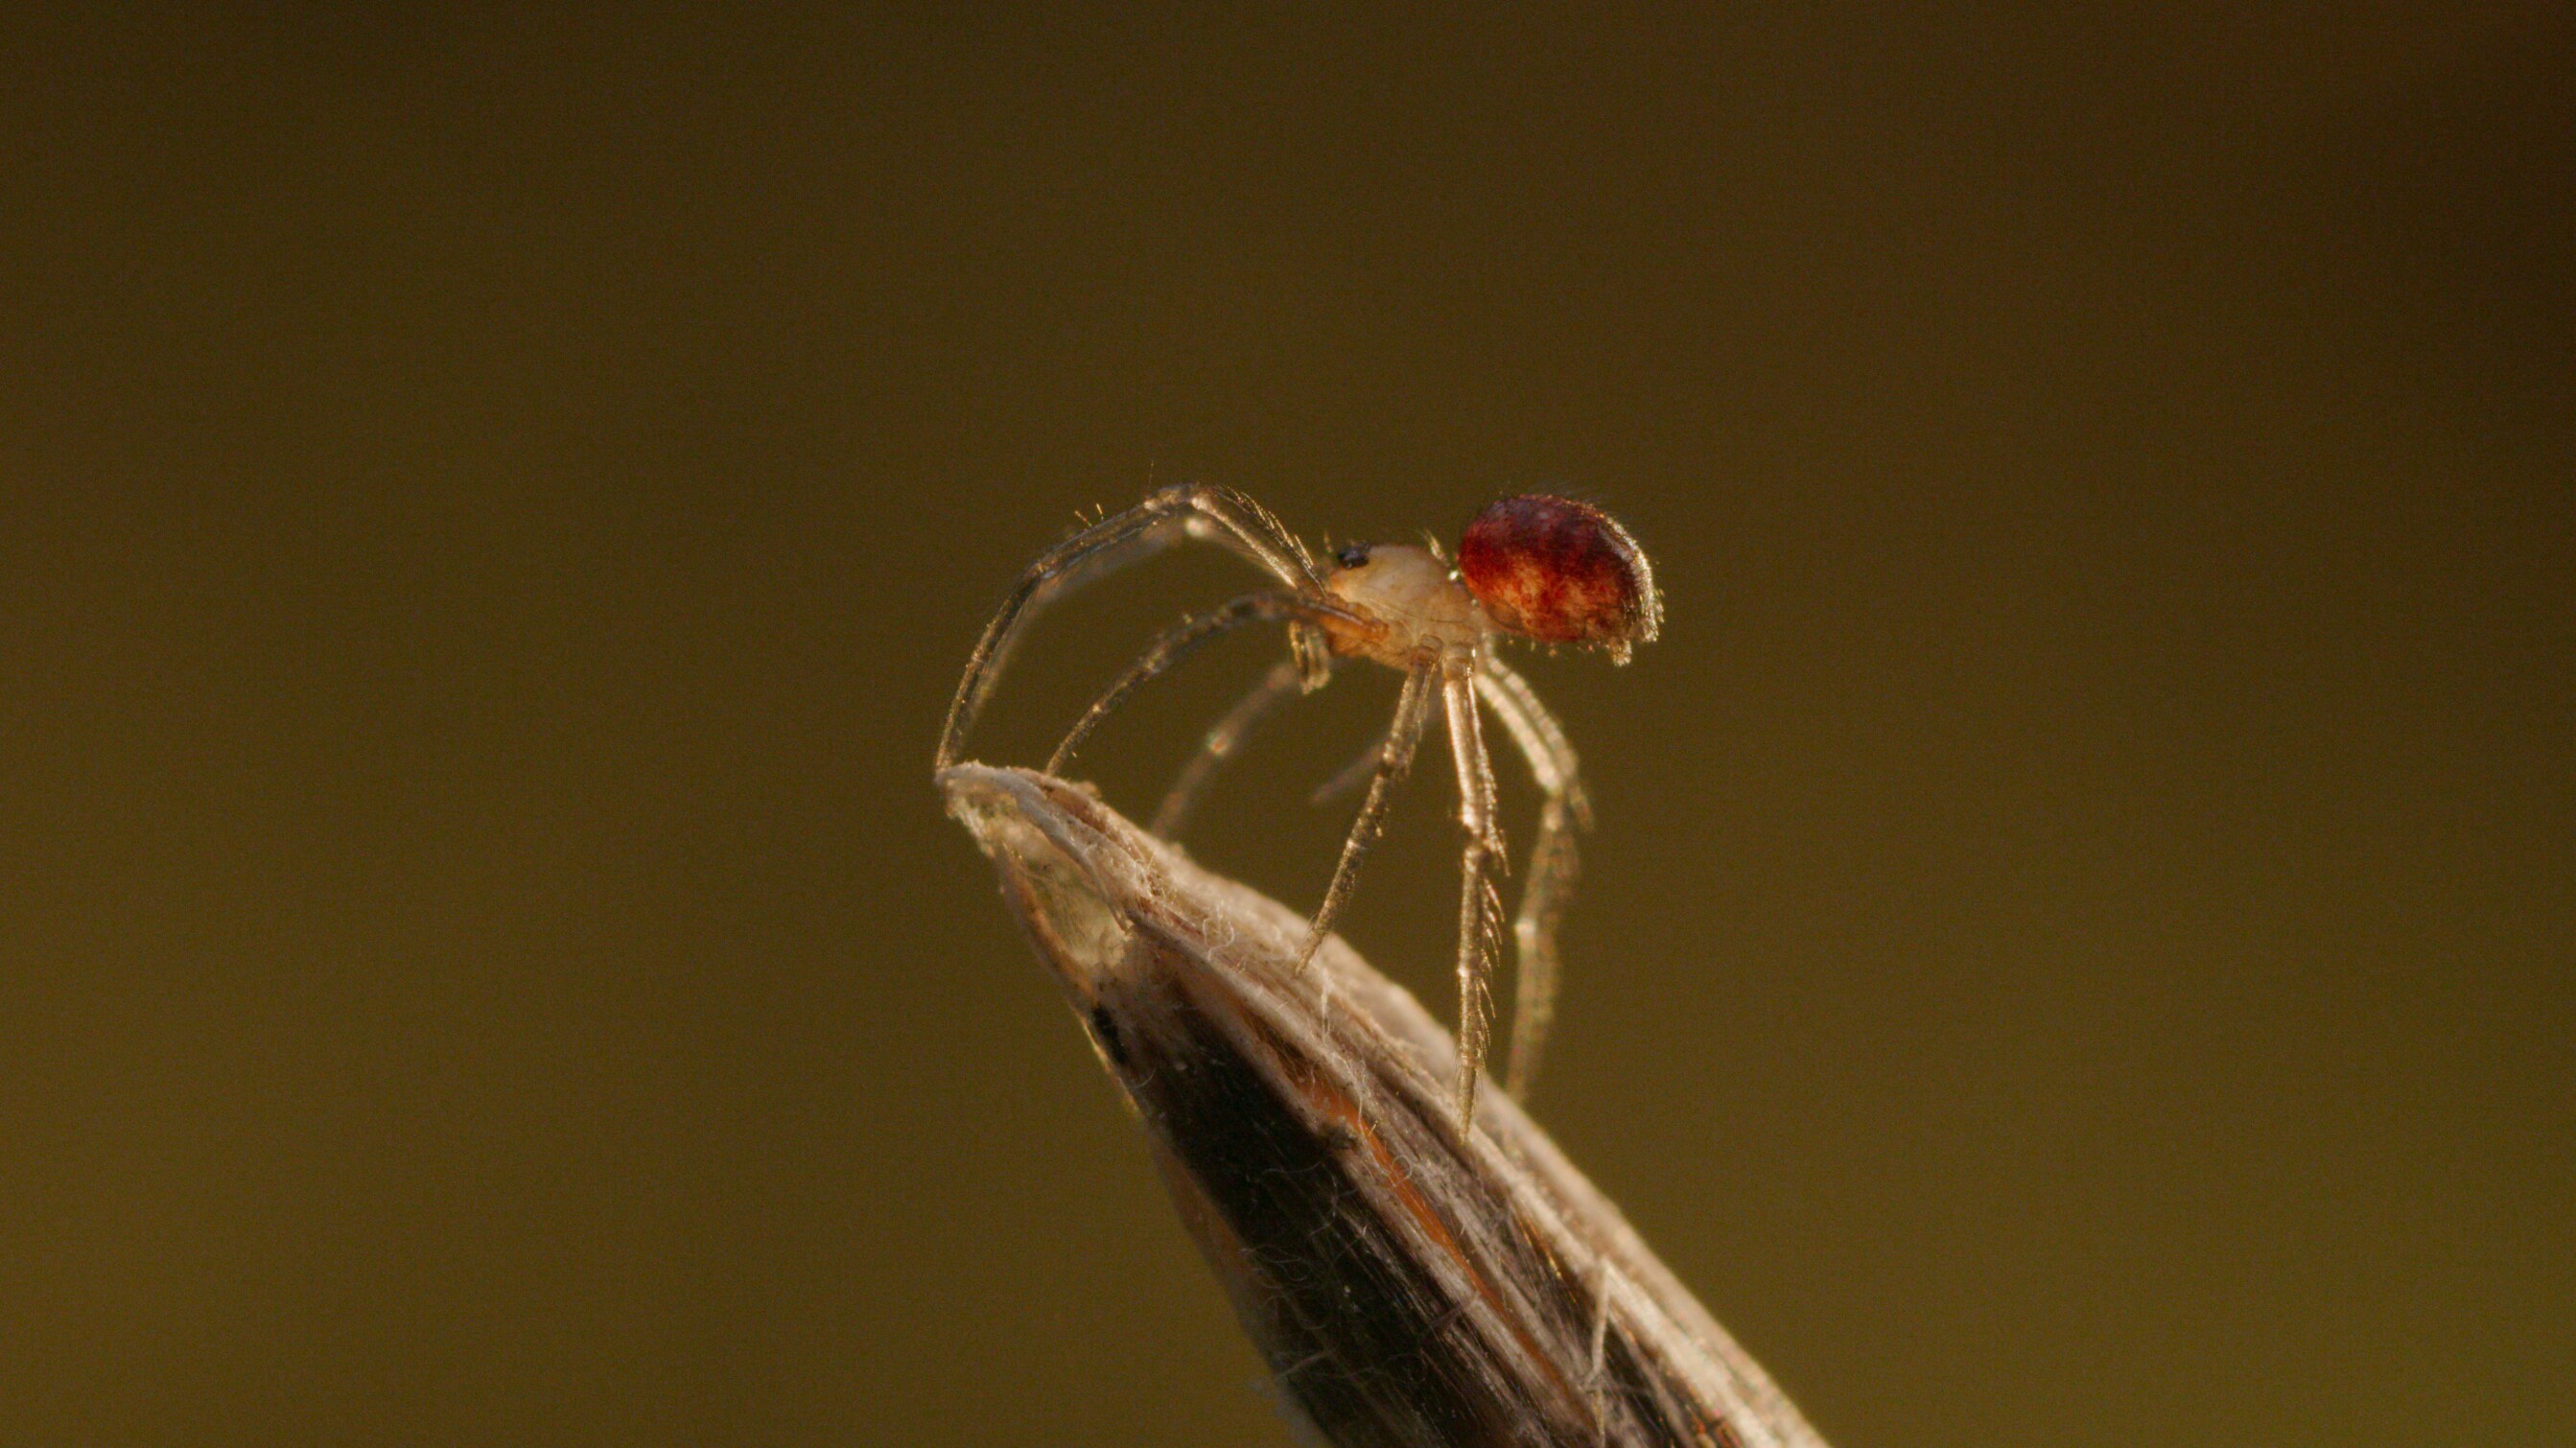 Cupboard spiderling on top of a branch. (National Geographic for Disney+/George Woodcock)